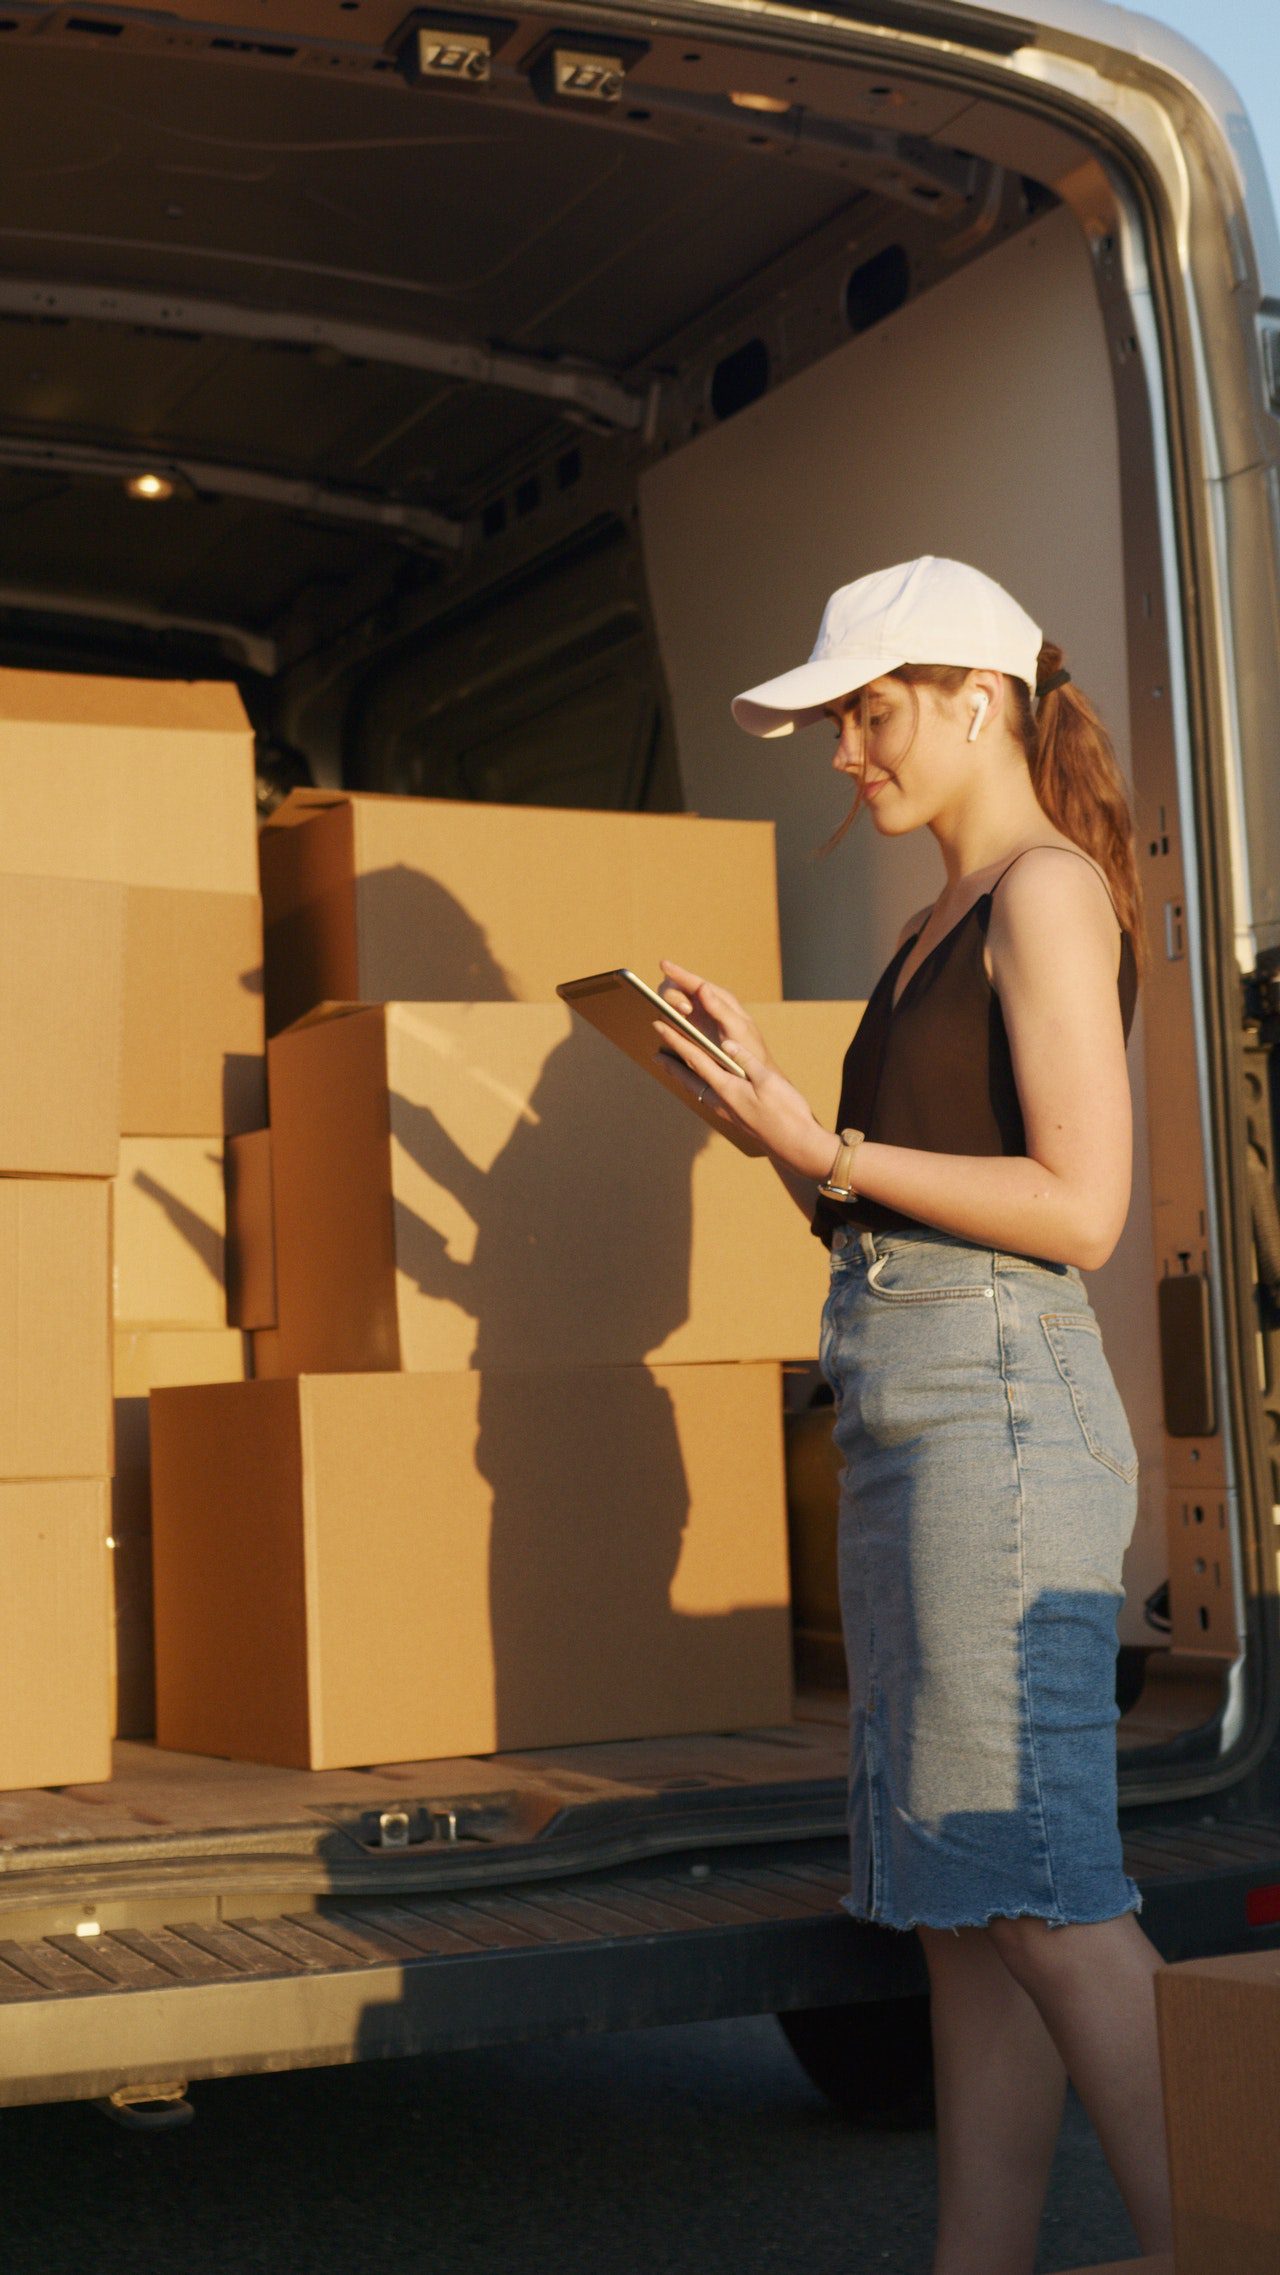 StrategyDriven Managing Your Business Article | Why You Should Take Advantage Of Overnight Shipping Services